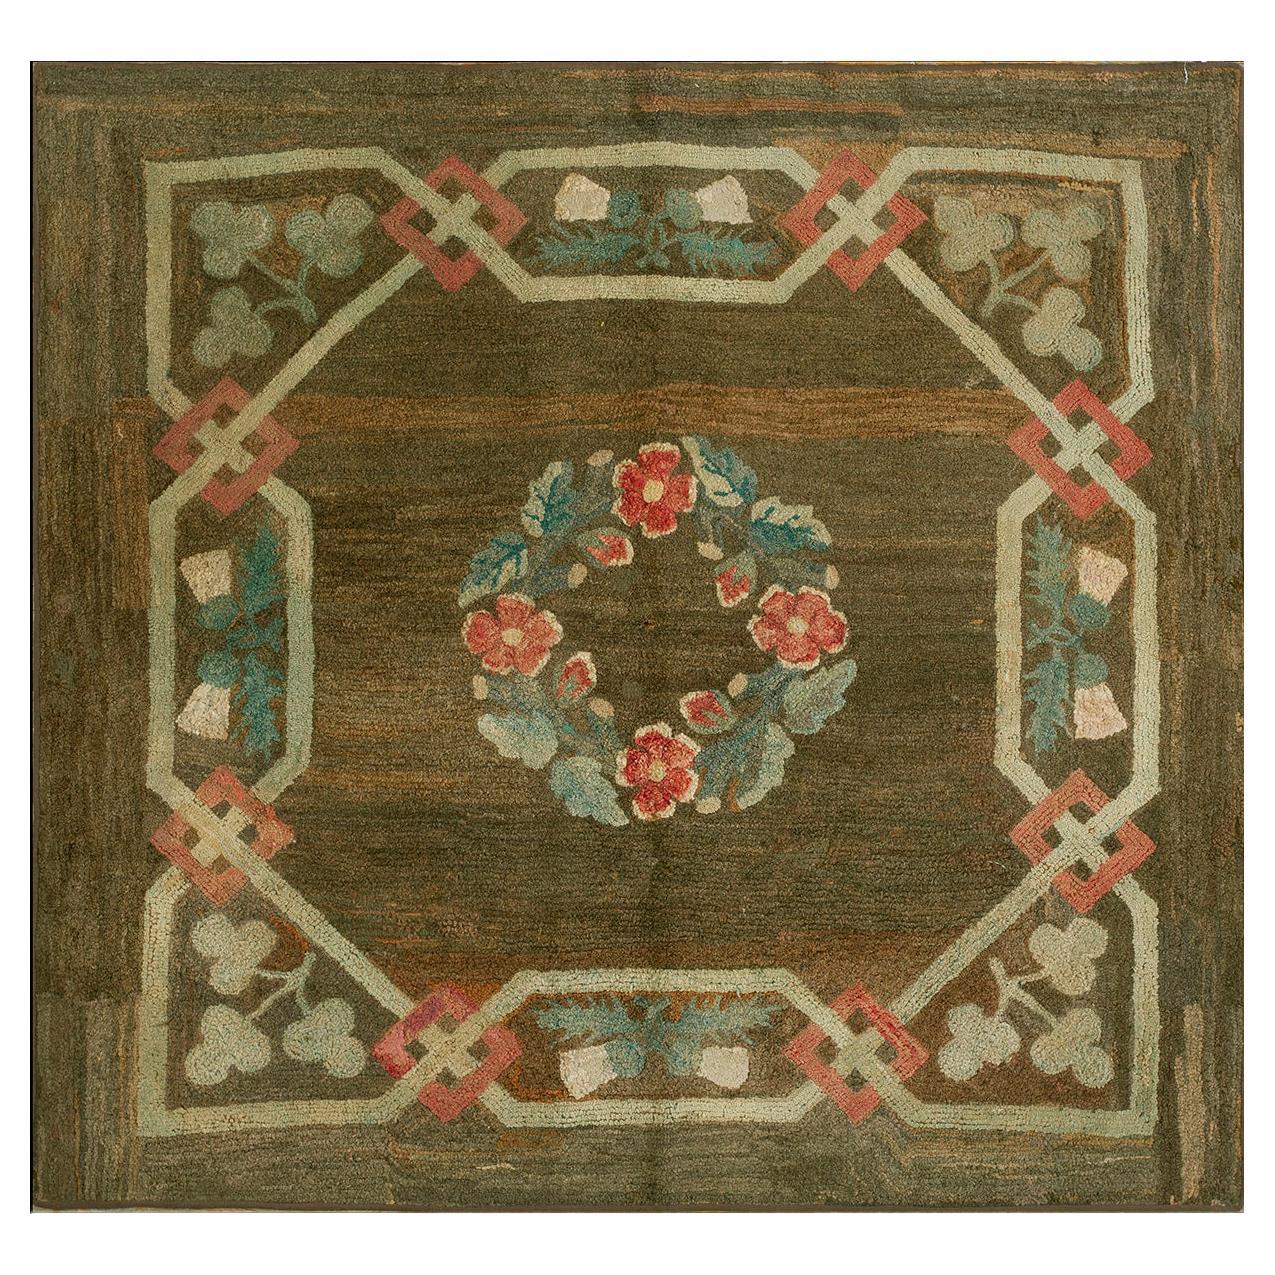 Early 20th Century American Hooked Rug ( 5' 9''x5' 10'' - 175 x 177 cm ) For Sale